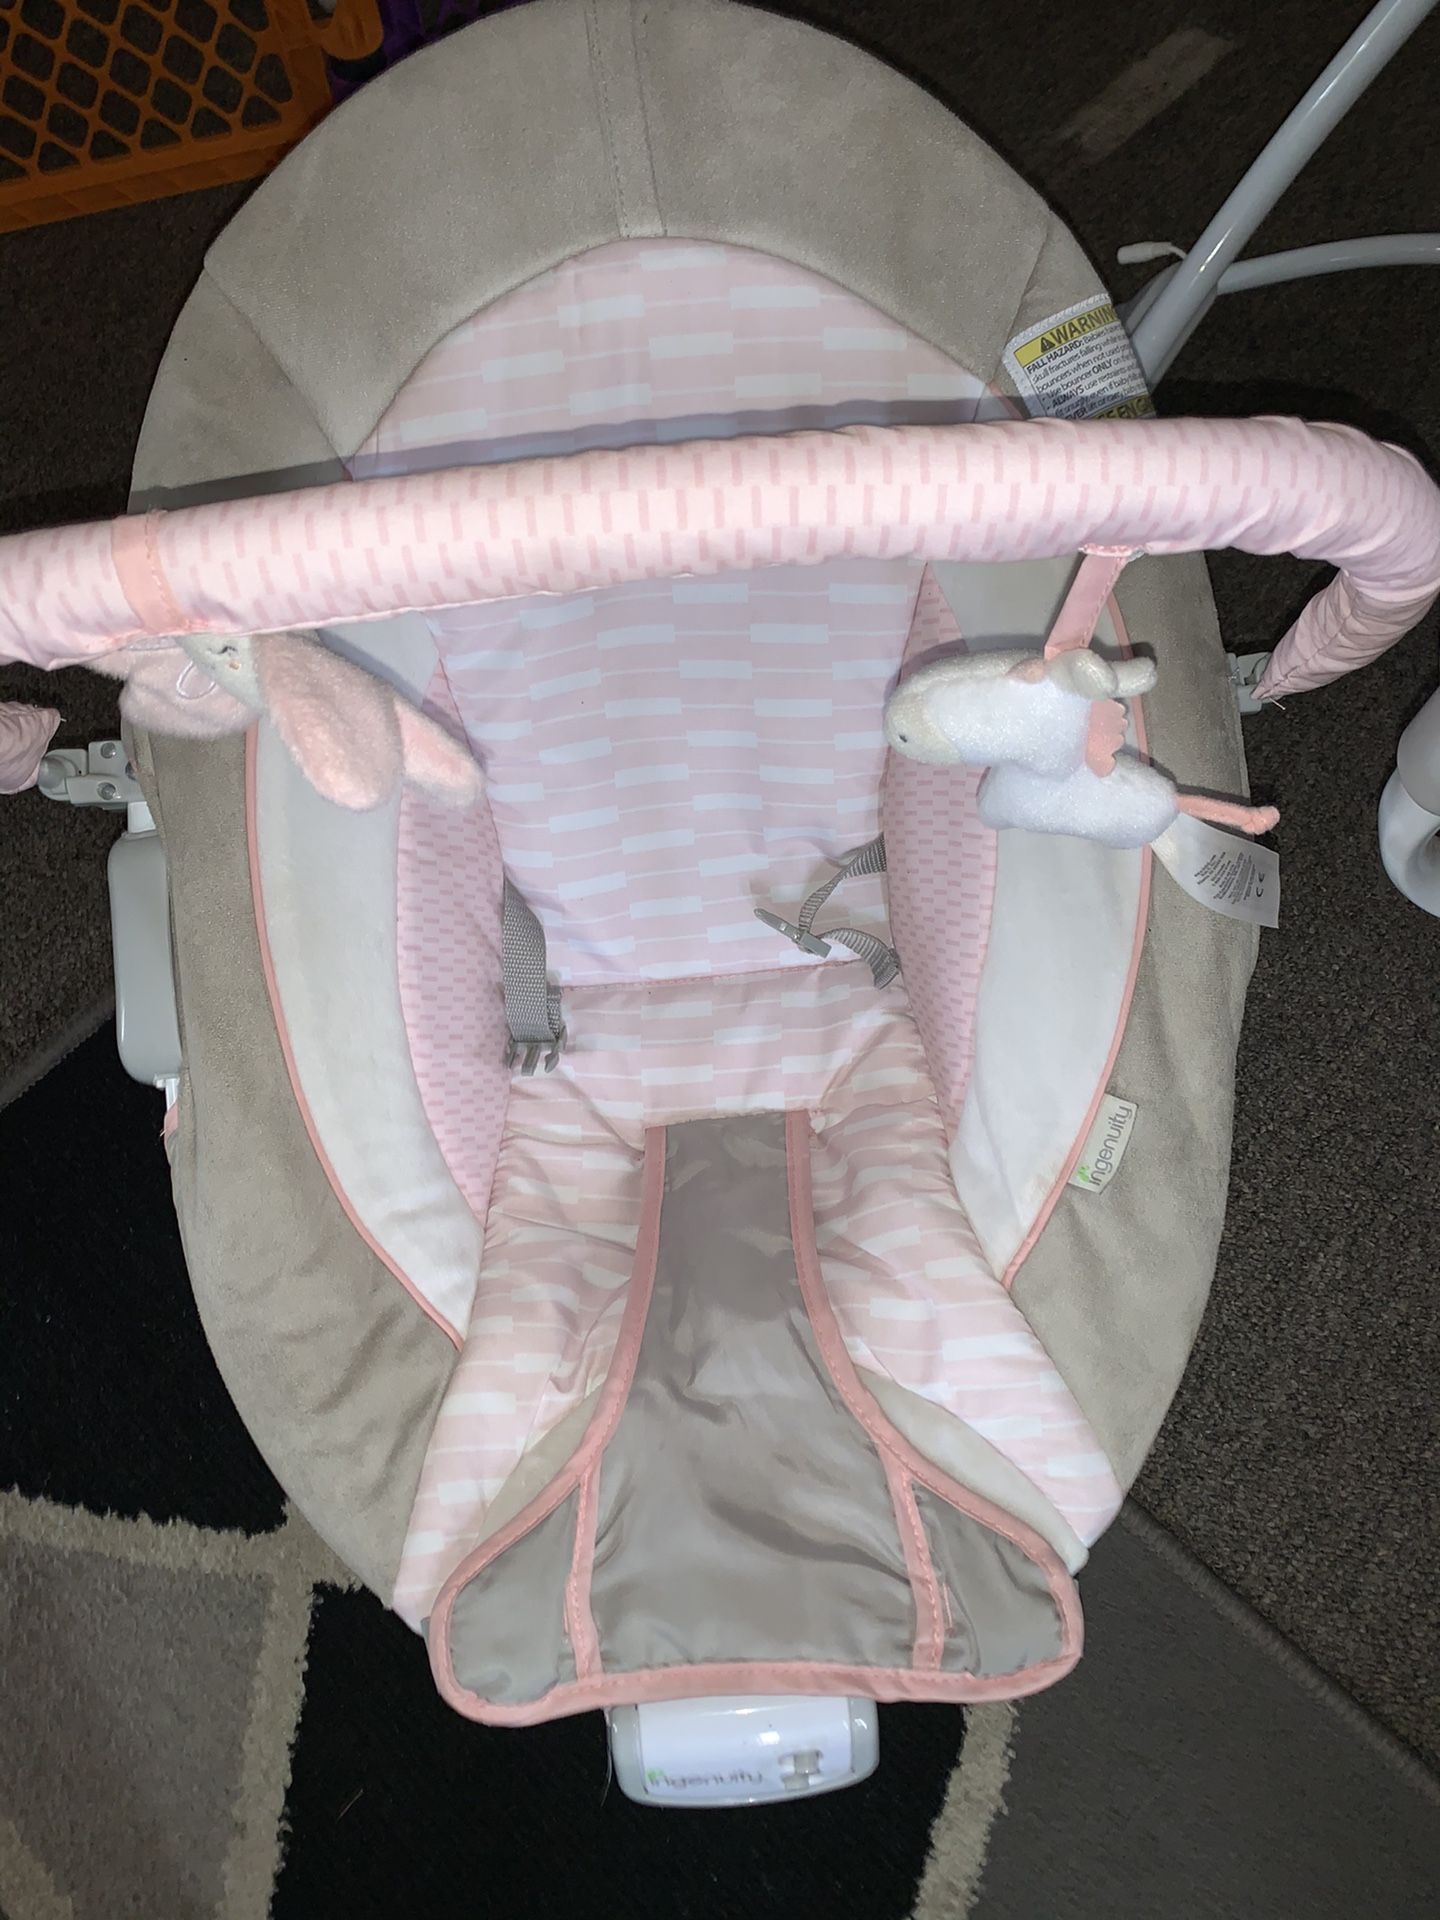 Baby swing and bouncer set